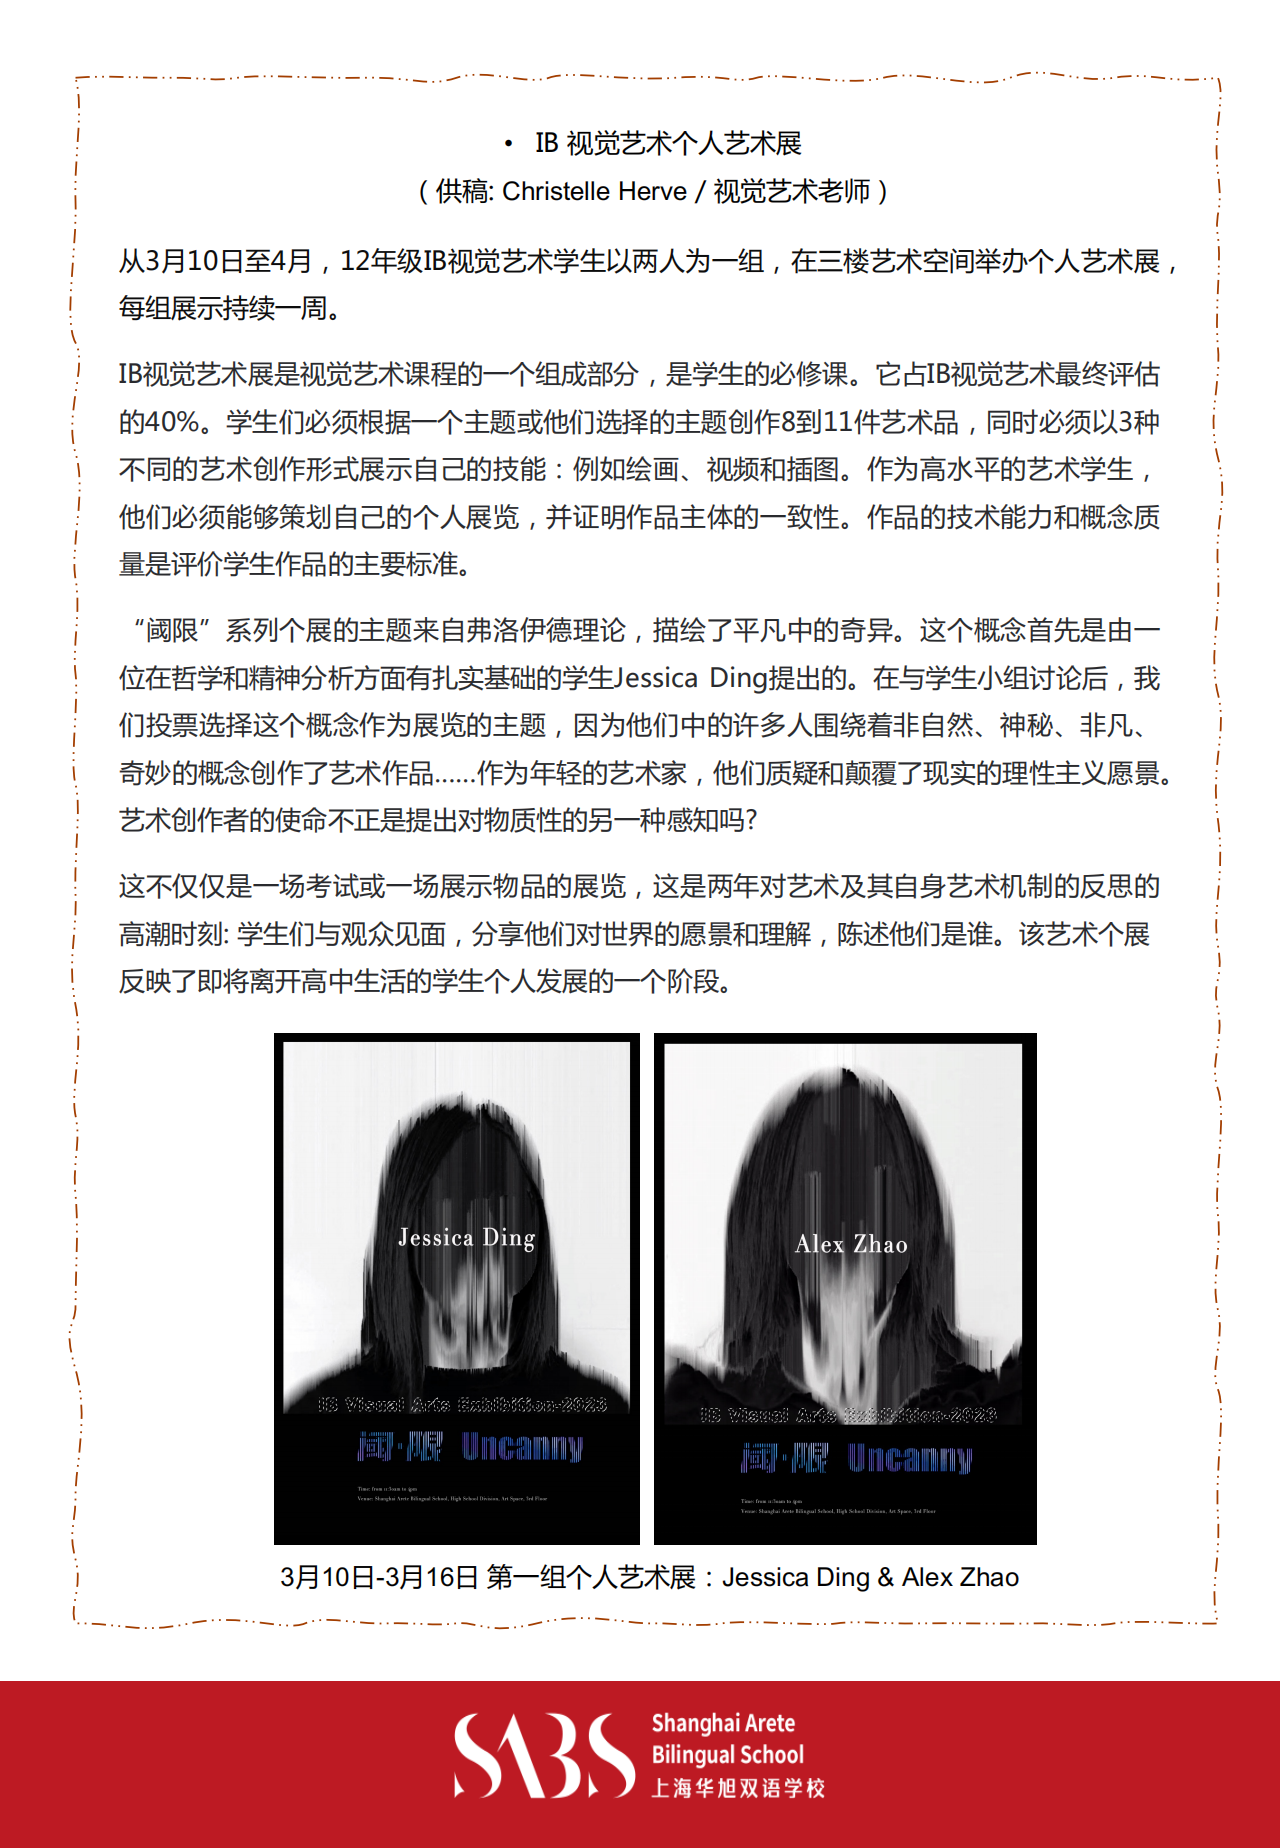 HS 2nd Issue Newsletter pptx（中文）_15.png